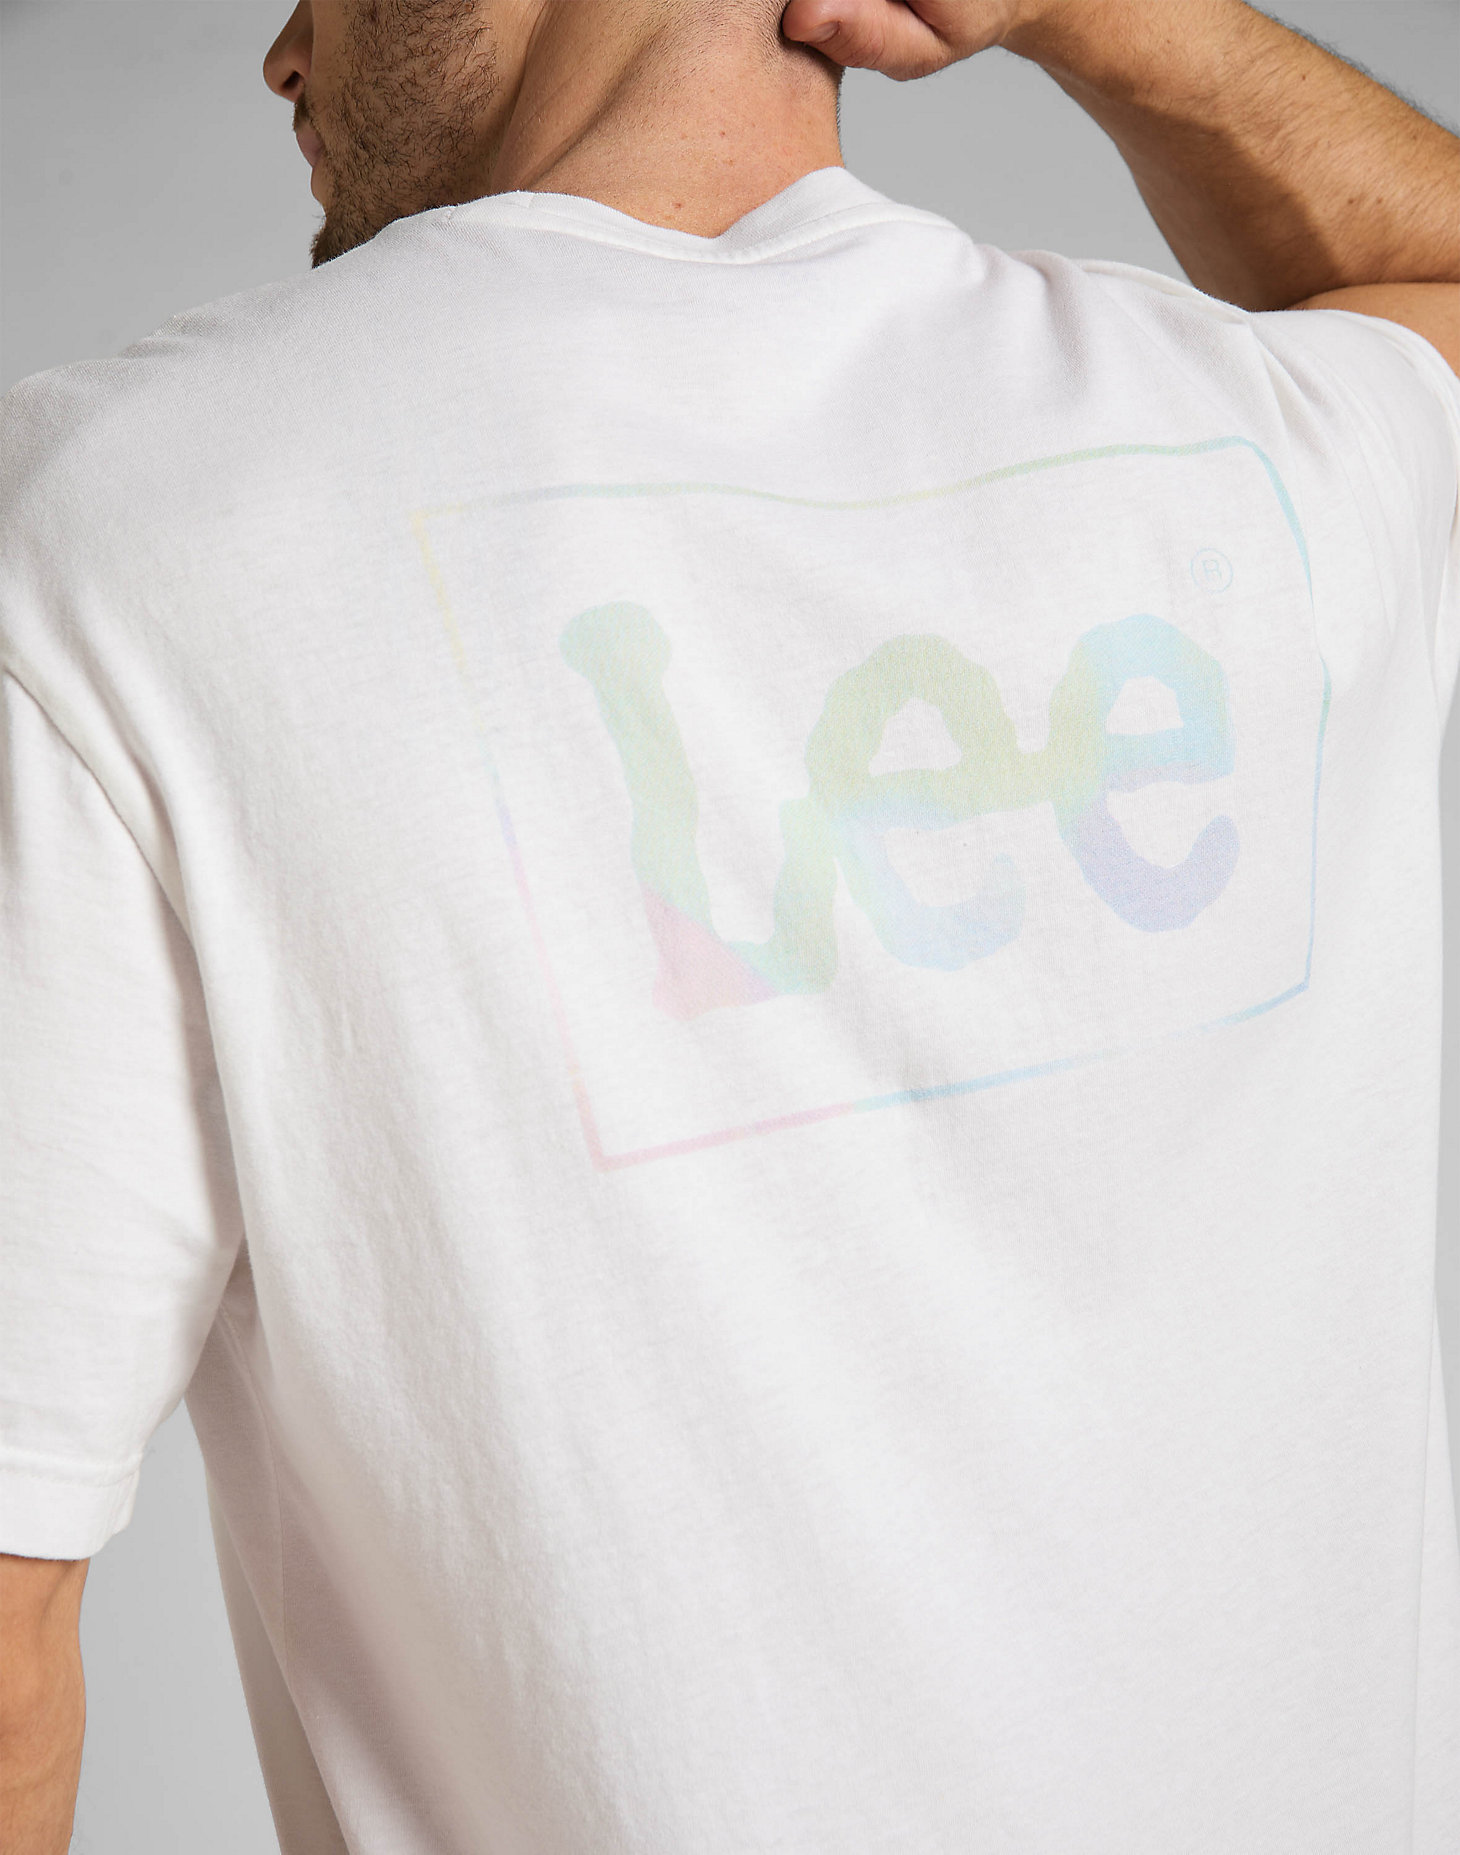 Logo Loose Tee in Bright White alternative view 4